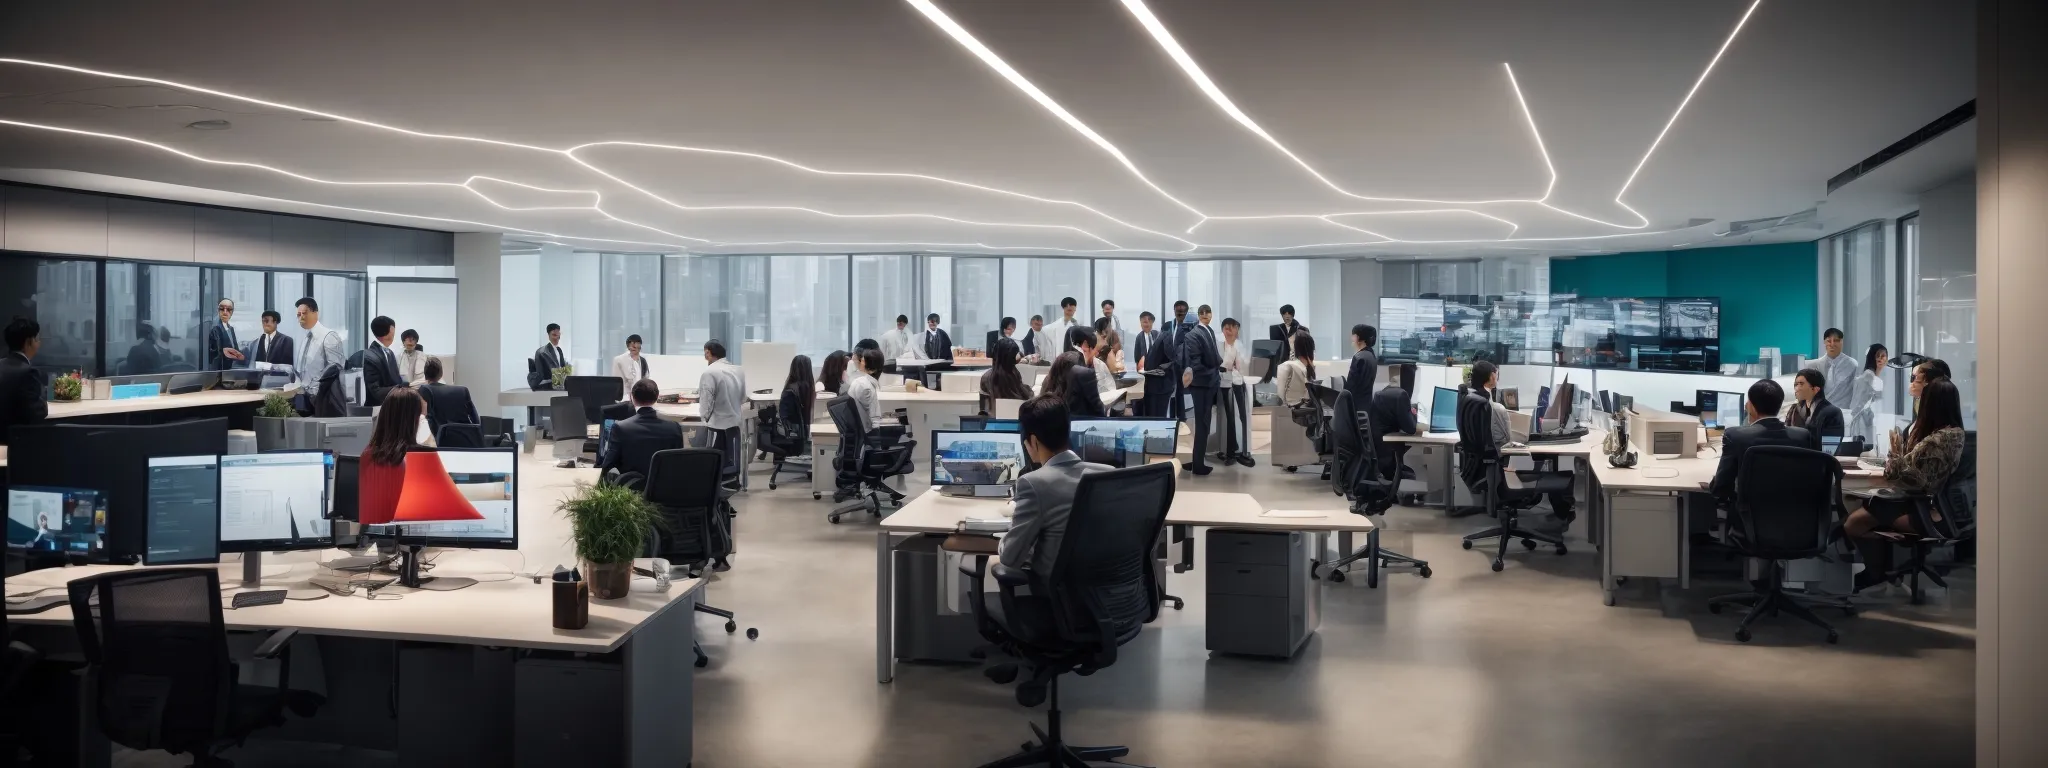 a sleek, modern office environment with a vibrant team engaging in a collaborative meeting around a large table, surrounded by computers and digital displays highlighting various career opportunities.